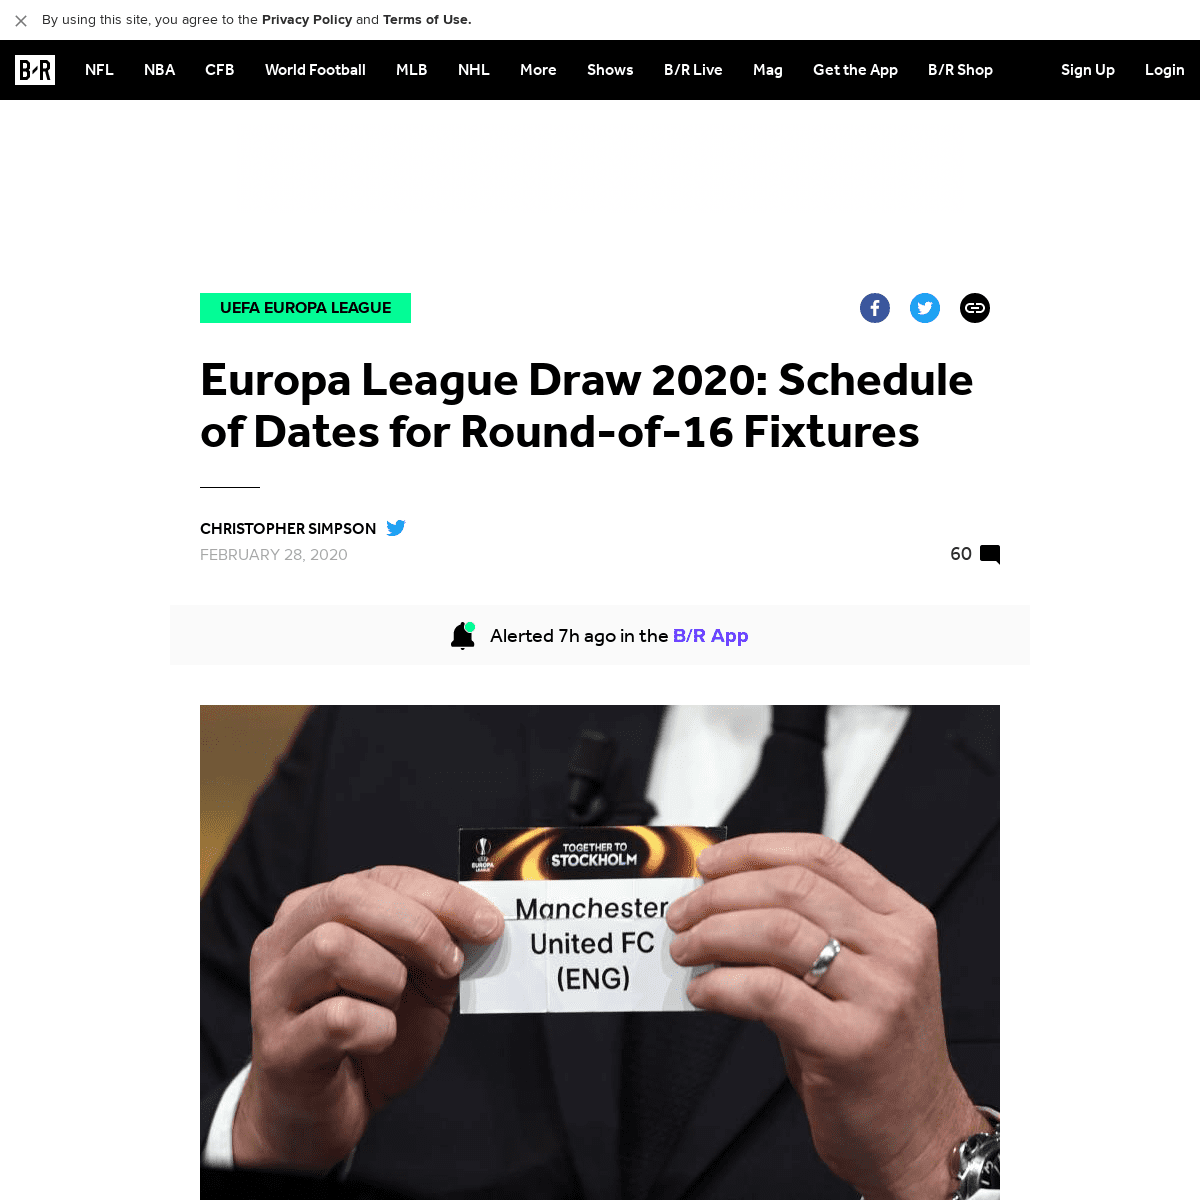 A complete backup of bleacherreport.com/articles/2878397-europa-league-draw-2020-schedule-of-dates-for-round-of-16-fixtures